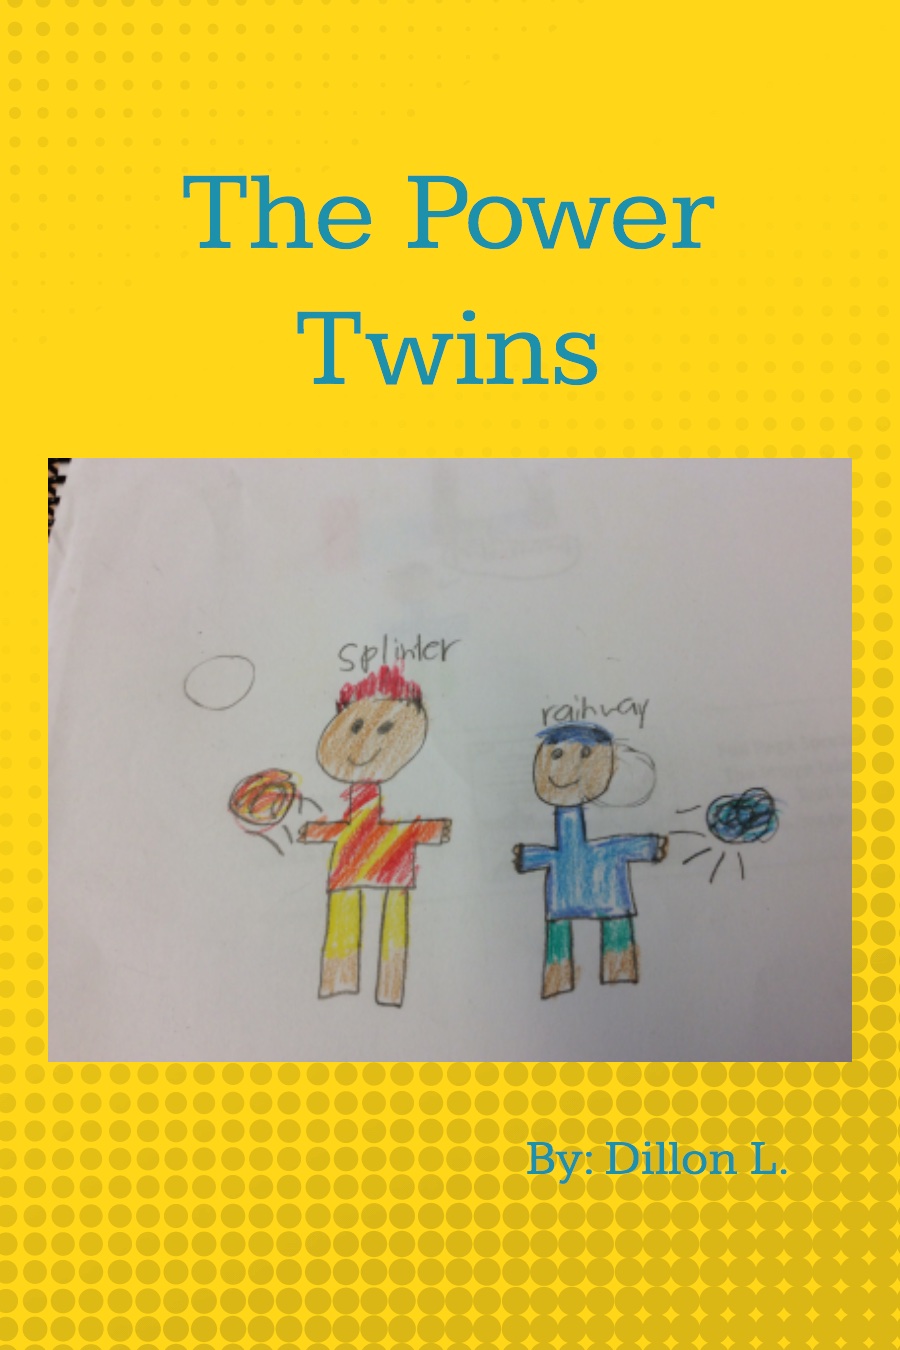 The Power Twins by Dillon L